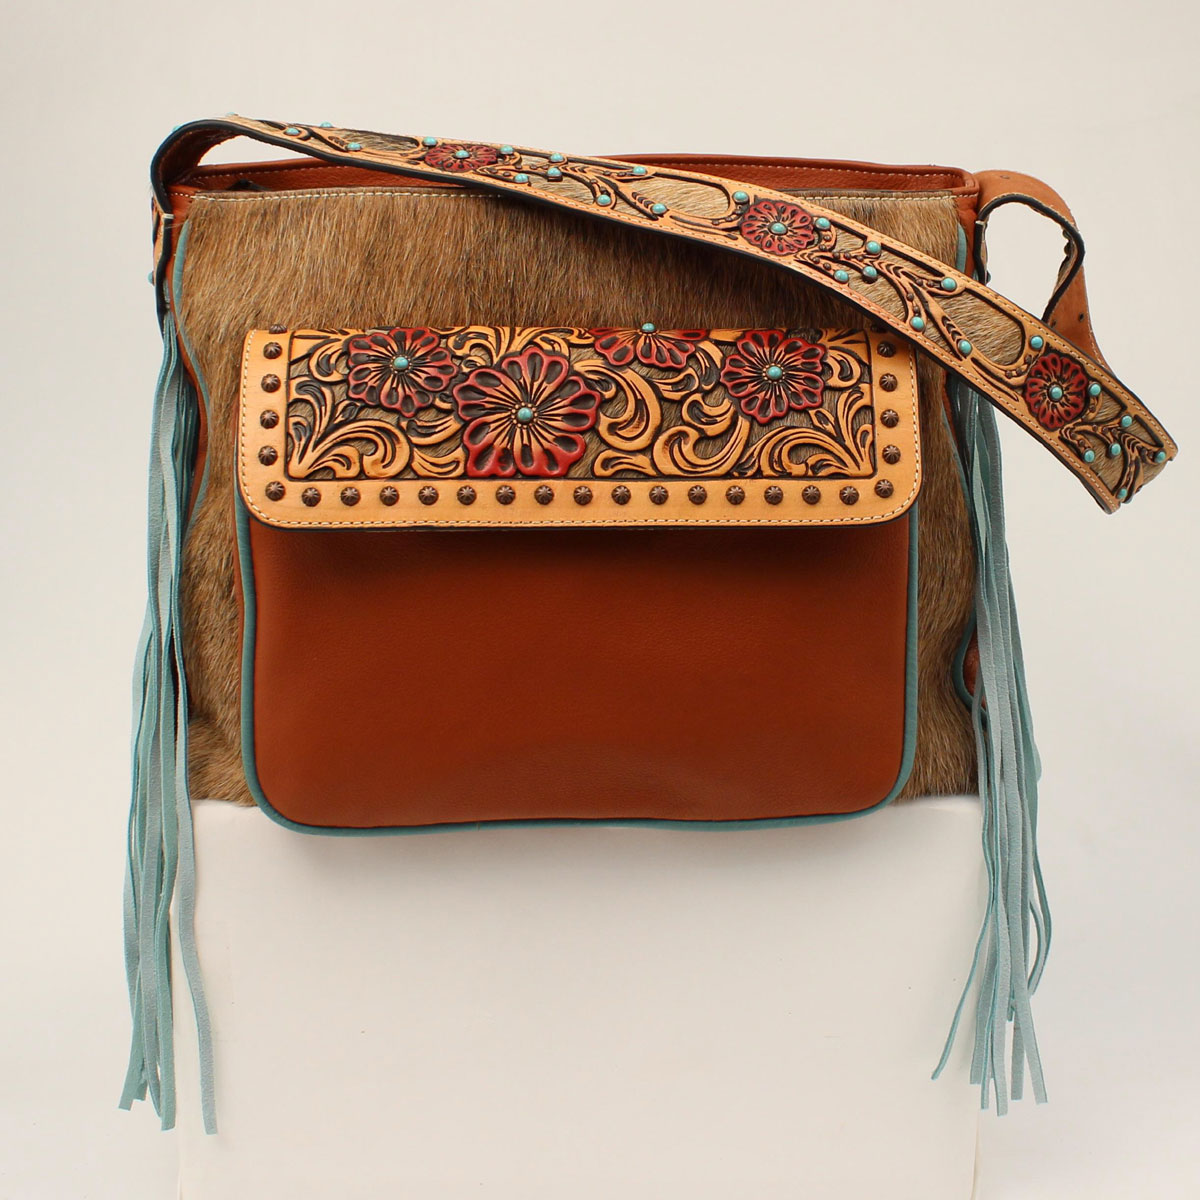 Ariat Tooled Leather Purse